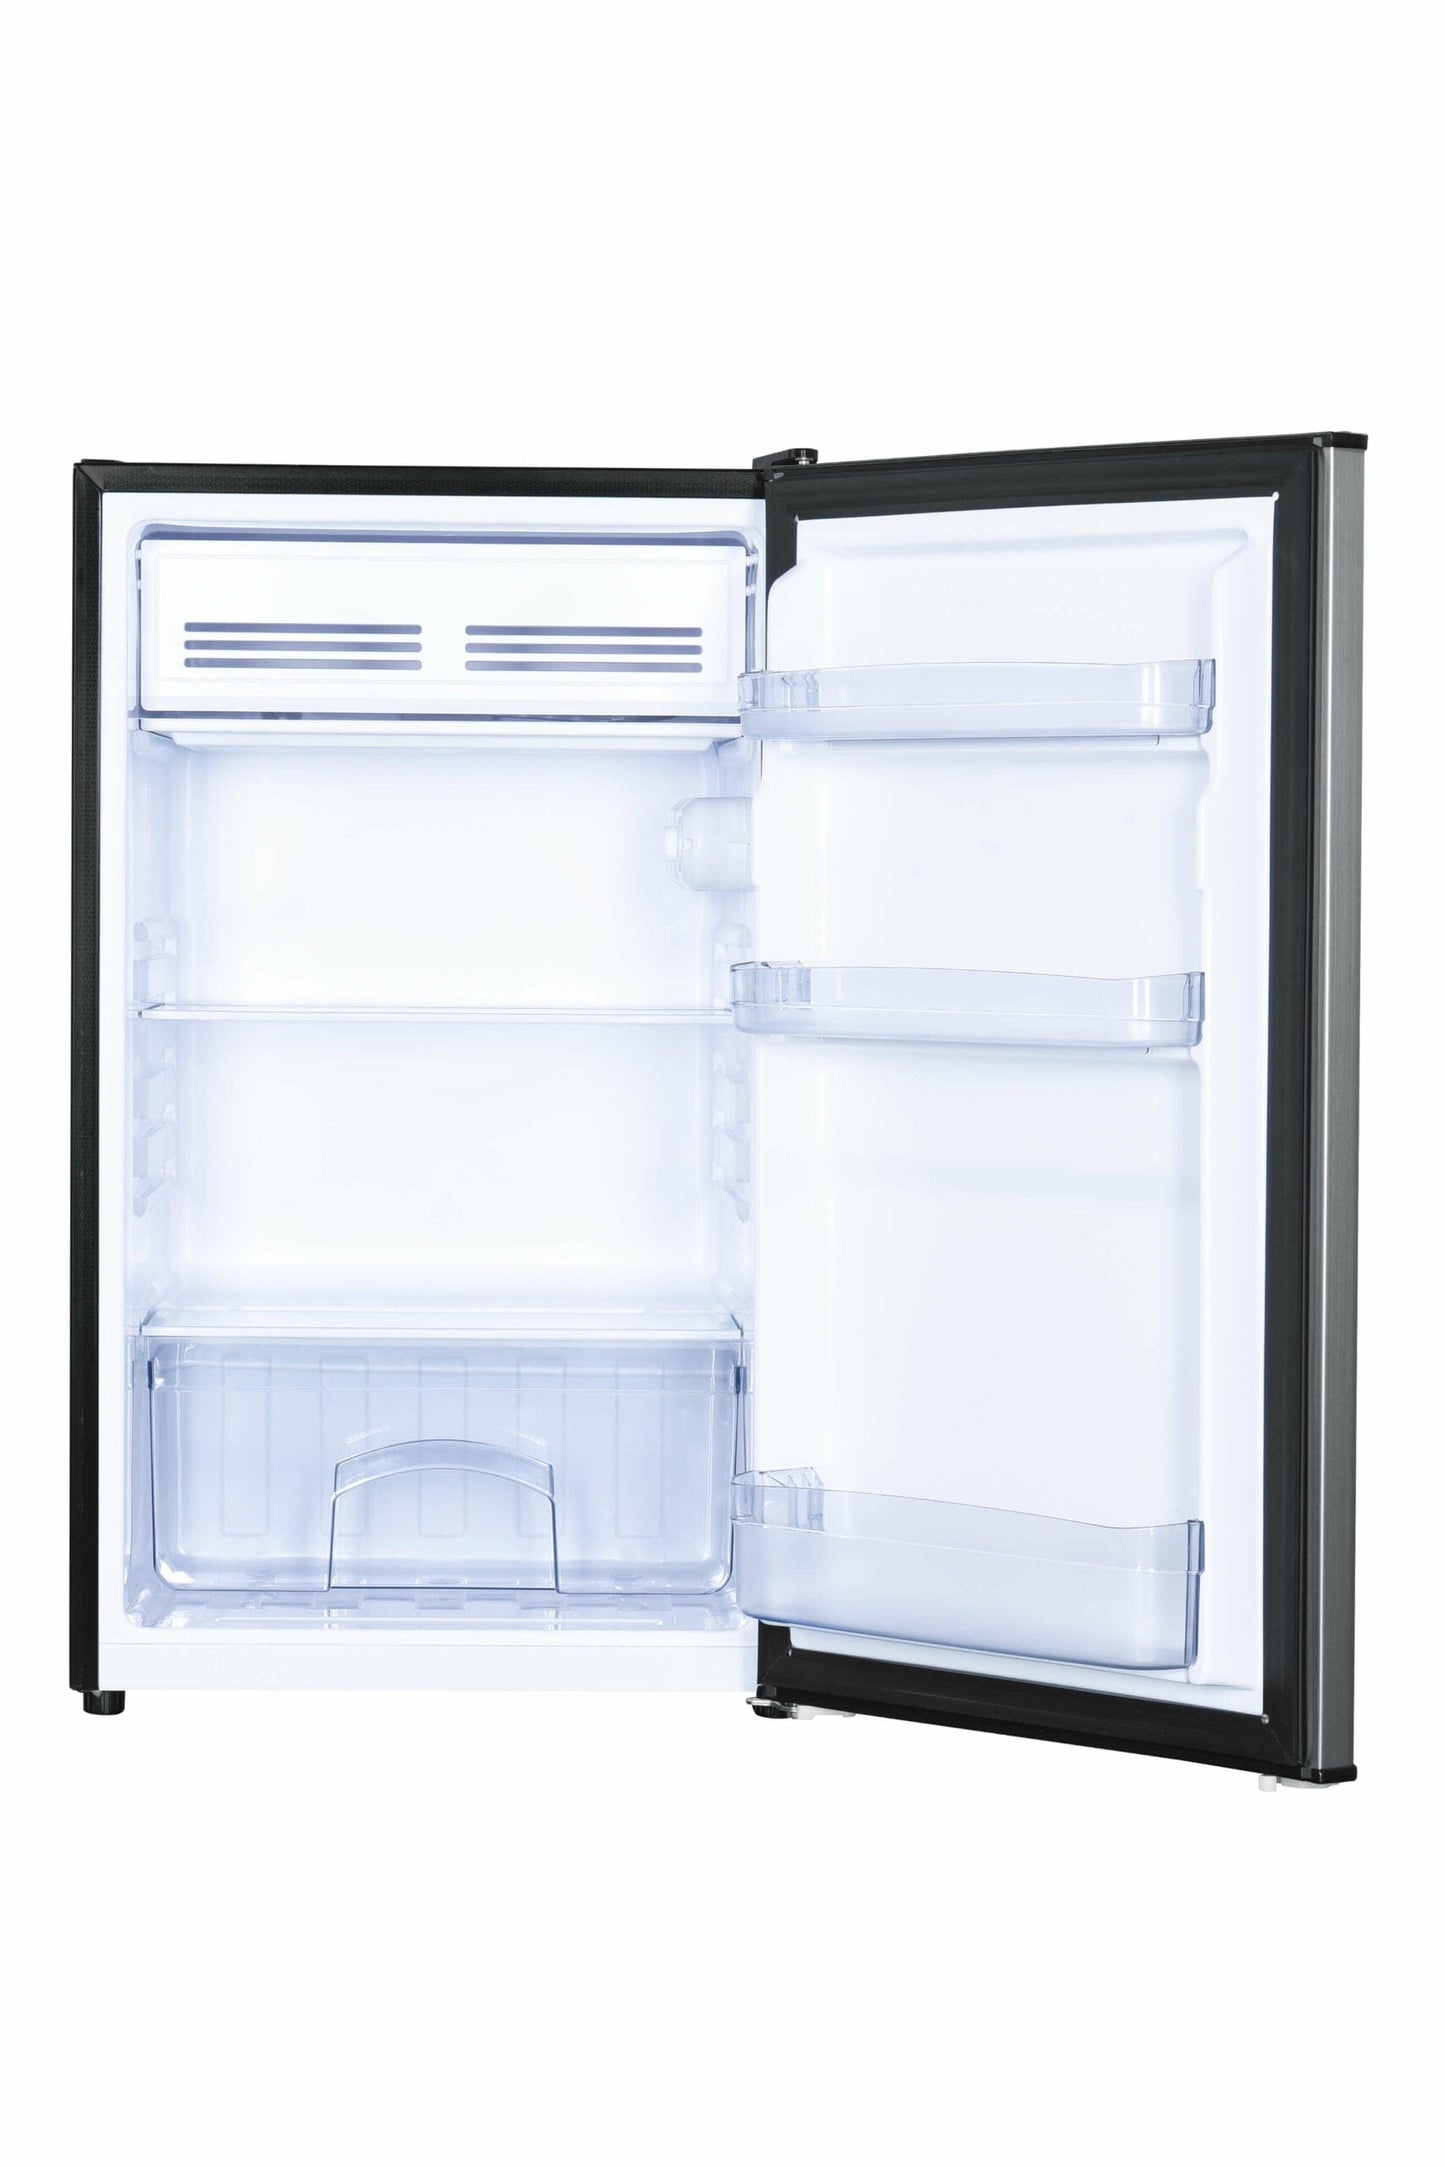 Danby Compact Refrigerator 4.4 cu.ft Stainless Steel